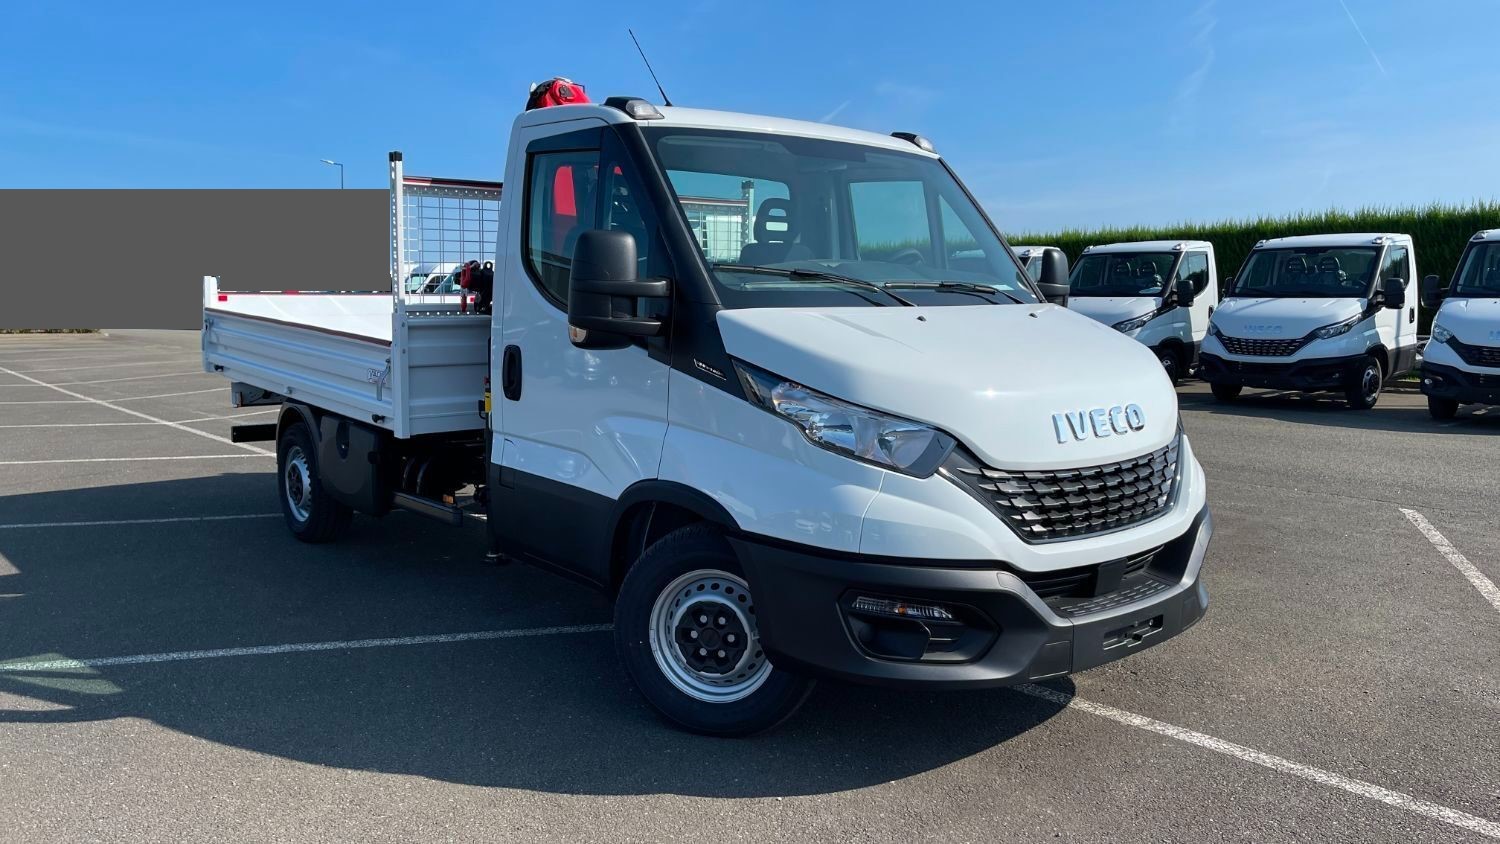 IVECO DAILY 35S14H BENNE+GRUE PK 3400 2.3L 136 CH BVM6 1 051 € HT/MOIS